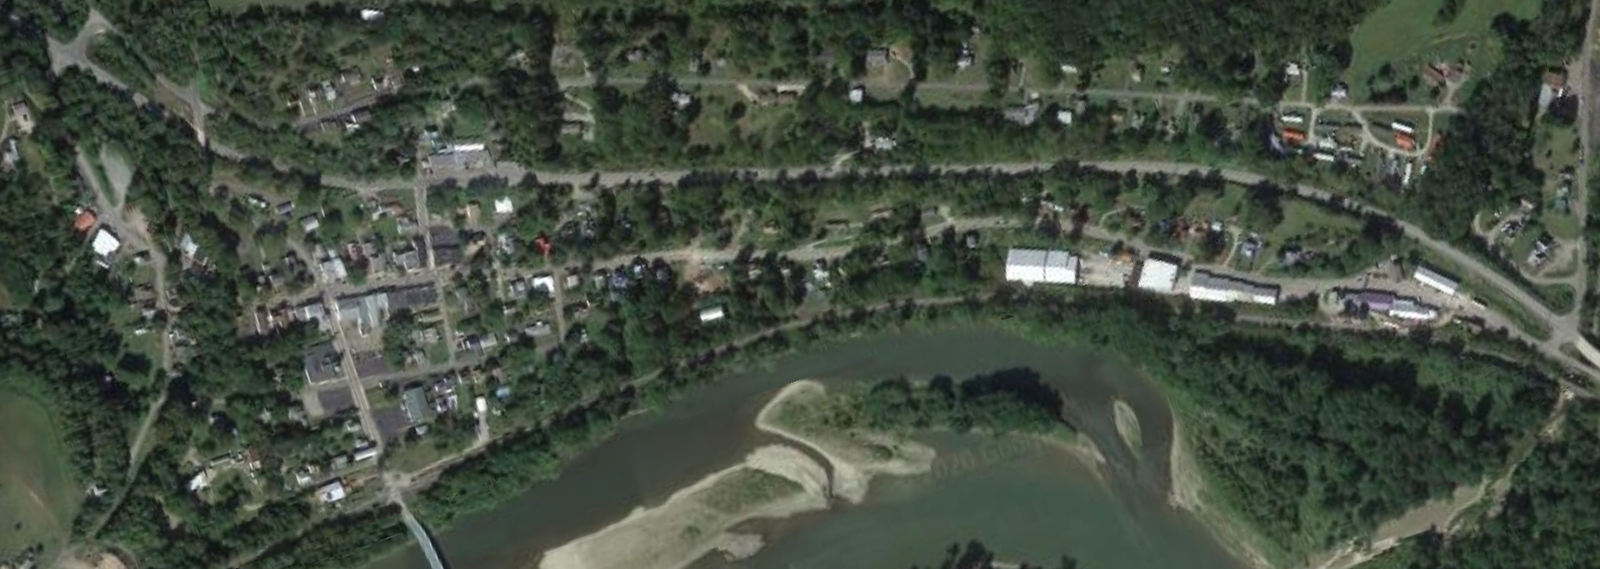 Laceyville Borough Aerial View